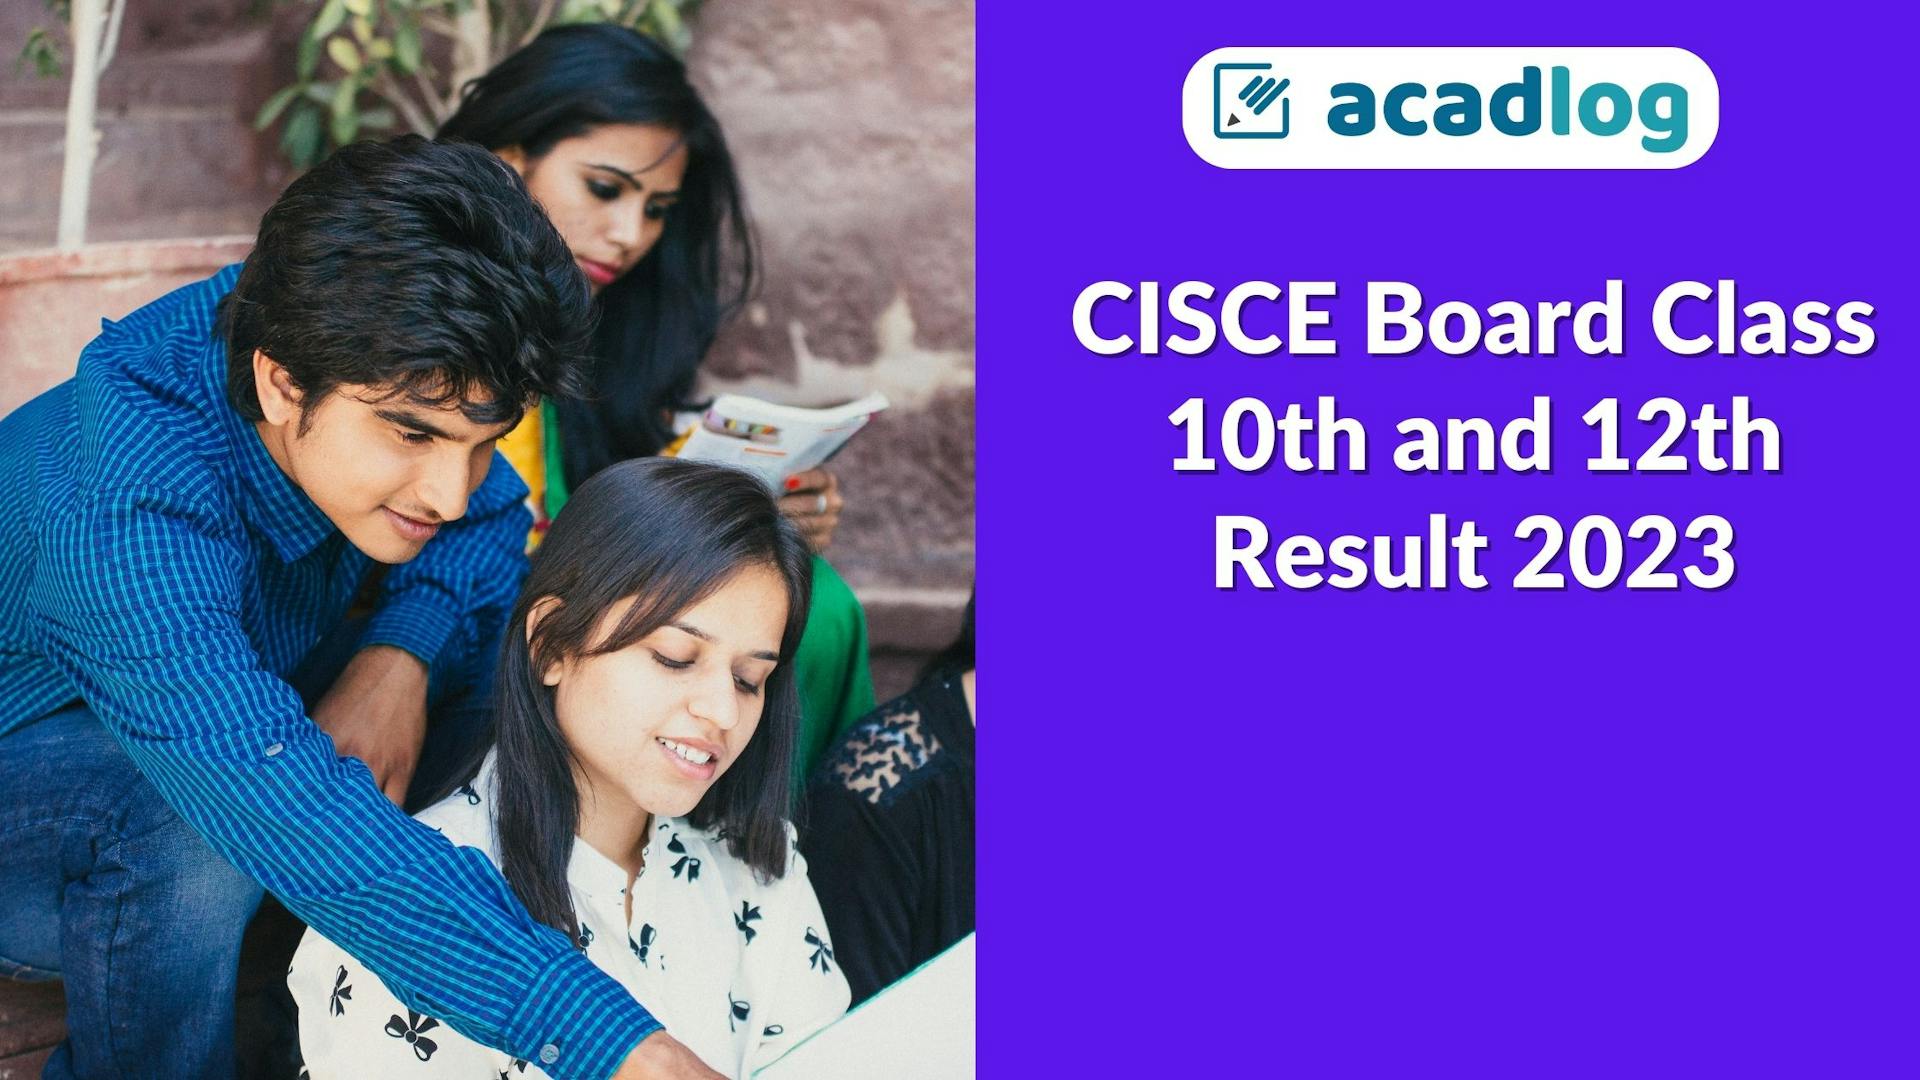 CISCE Board Class 12th Inter & 10th Results 2023 - Direct Link